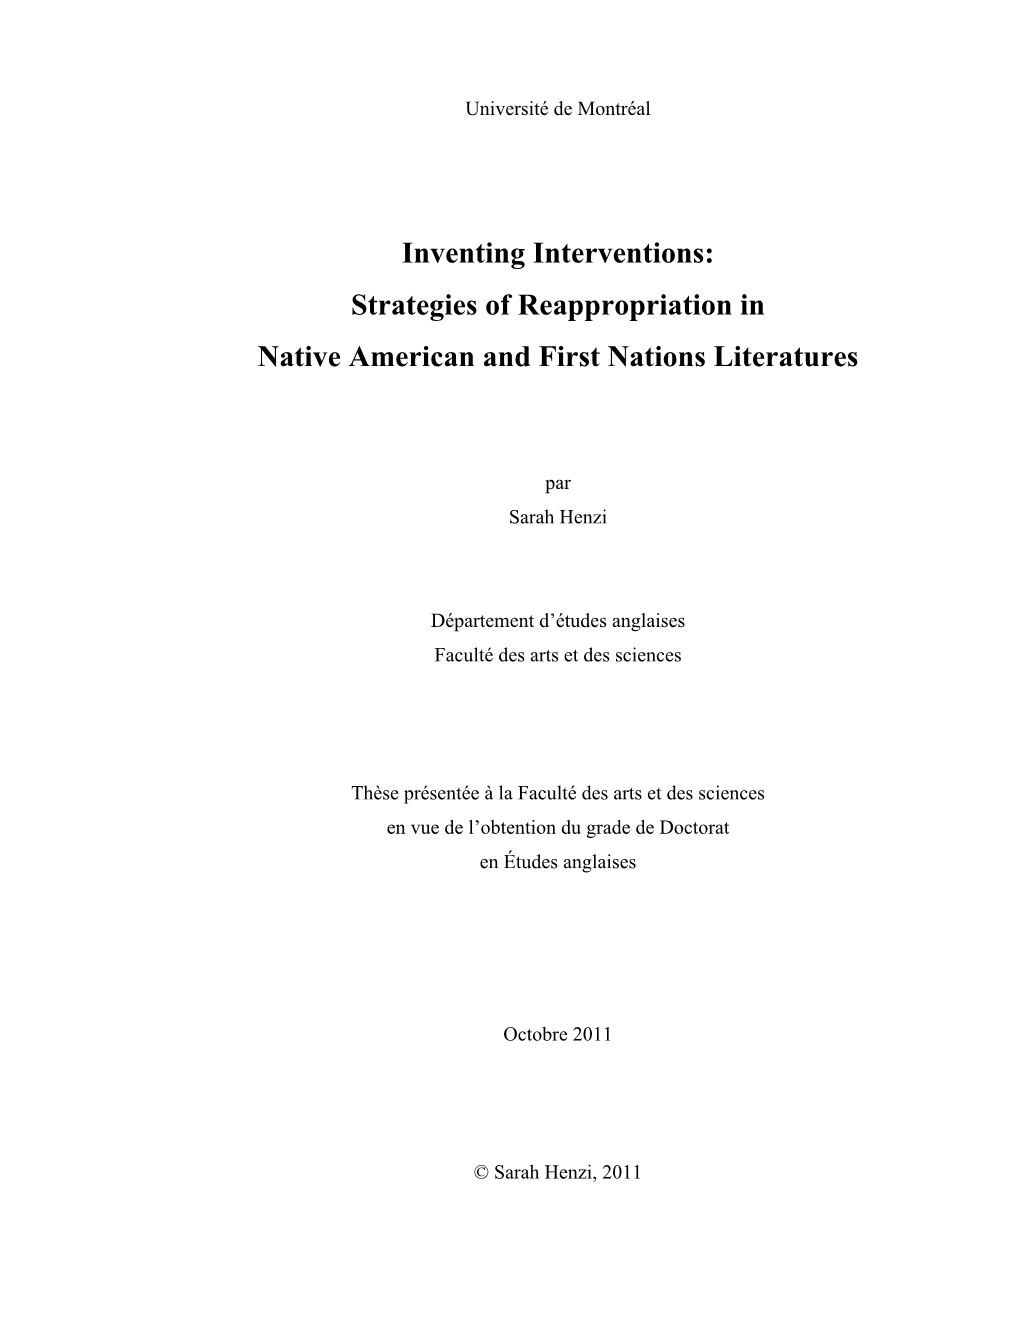 Inventing Interventions: Strategies of Reappropriation in Native American and First Nations Literatures